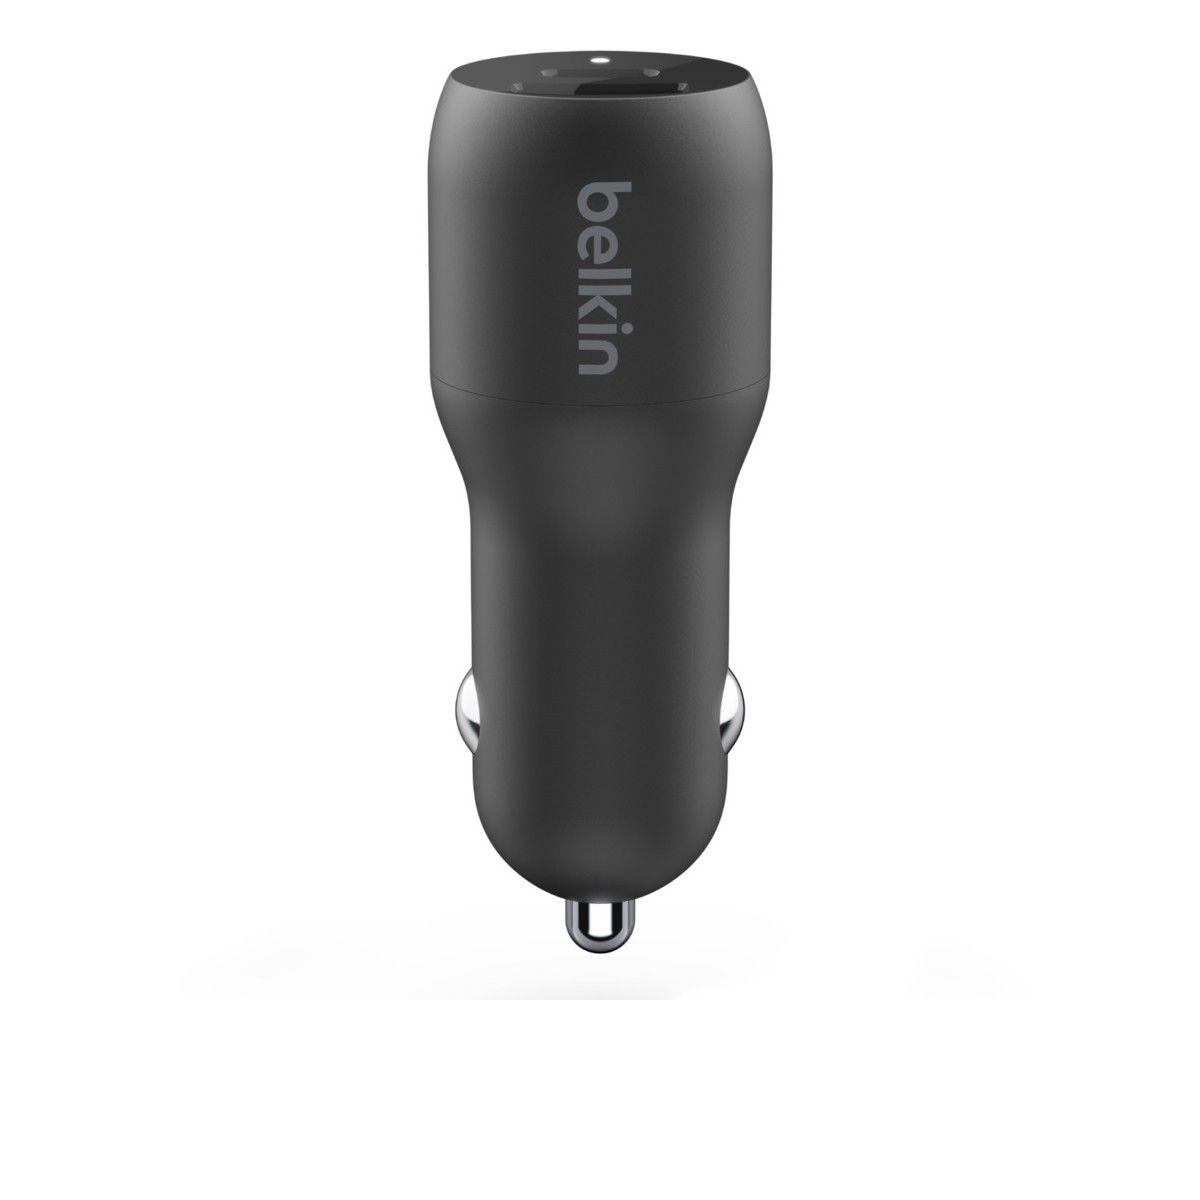 Belkin BOOSTCHARGE Dual Car Charger with PPS 37W